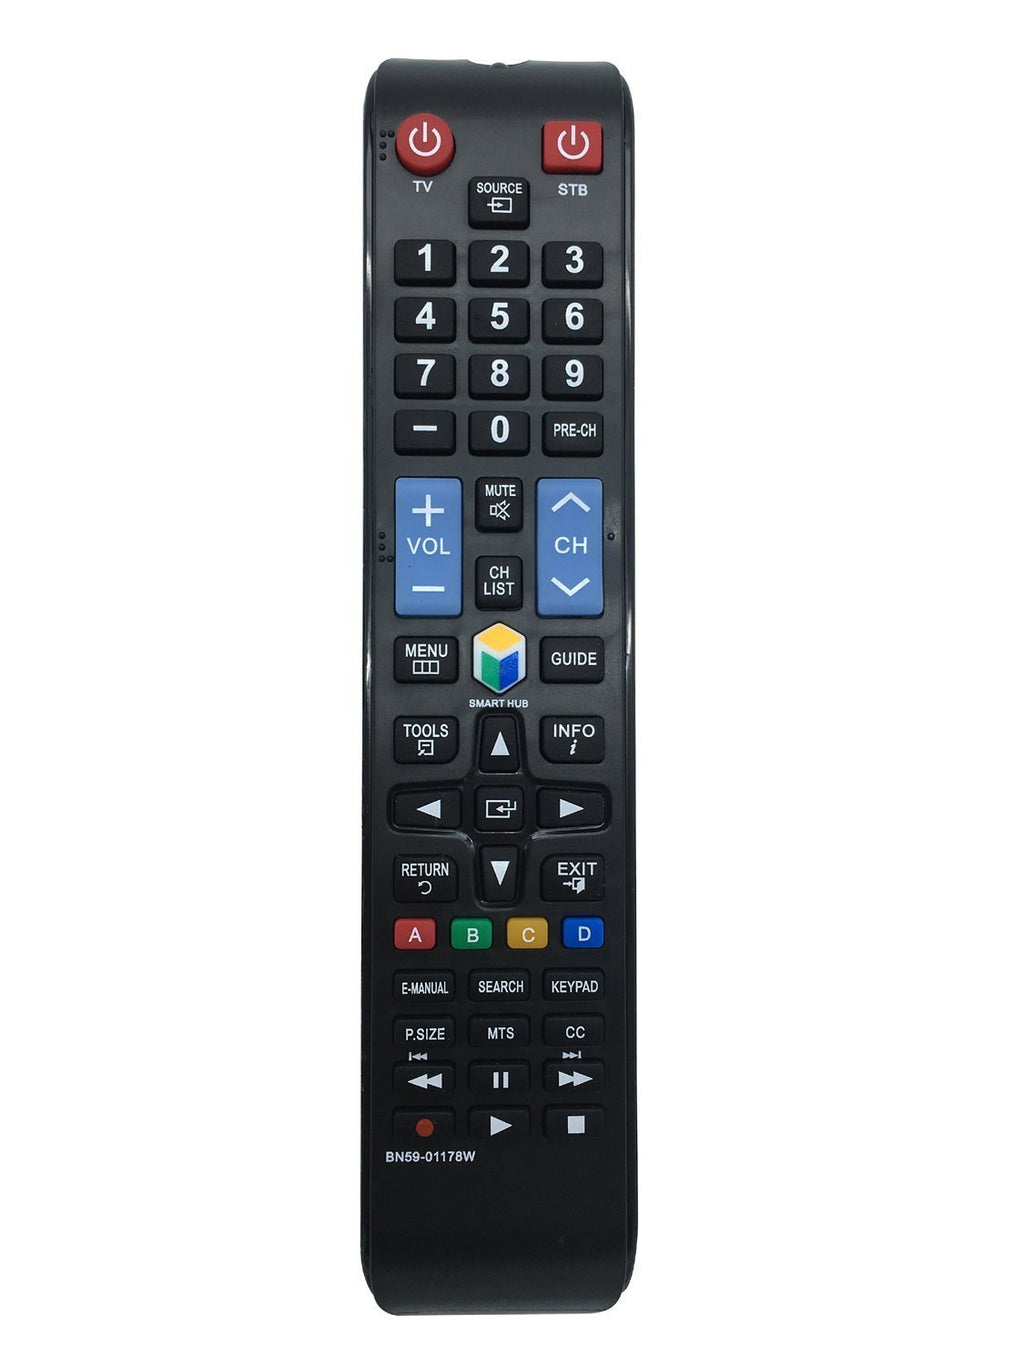 BN59-01178W Replaced Remote Fit for Samsung Smart TV UN46H6201AFXZA UN46H6203AF UN46H6203AFXZA UN50H5203AF UN50H5203AFXZA UN50H6201AF UN50H6201AFXZA UN50H6203AF UN58H5202AFXZA UN55HU6830FXZA